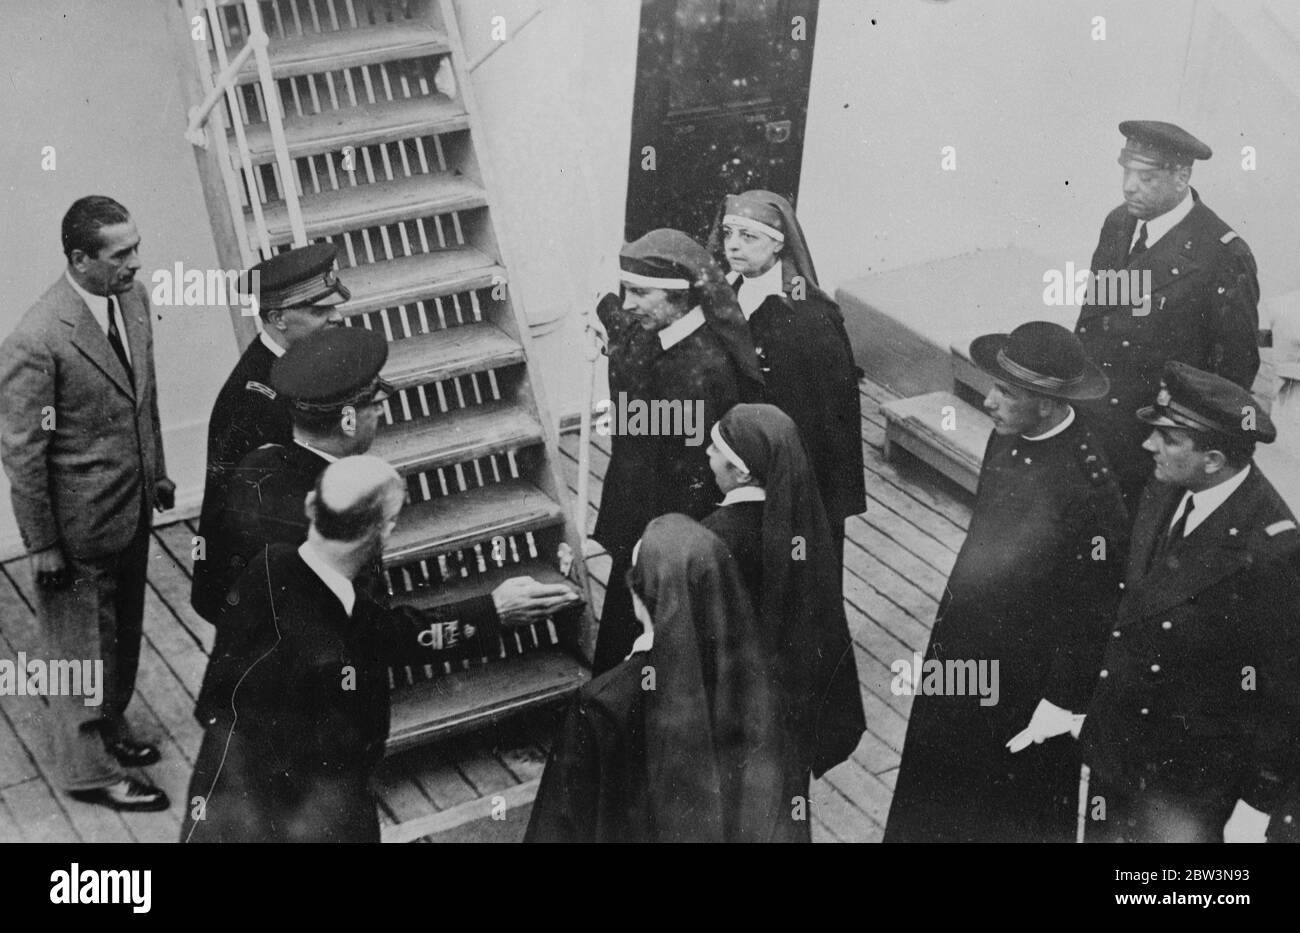 Italian Crwn Princess Inspects Hospital Ship The Princess Of Piadmont Wife Of The Heir To The Italian Throne Wore Nurse S Uniform When She Inspected A Hospital Ship Just